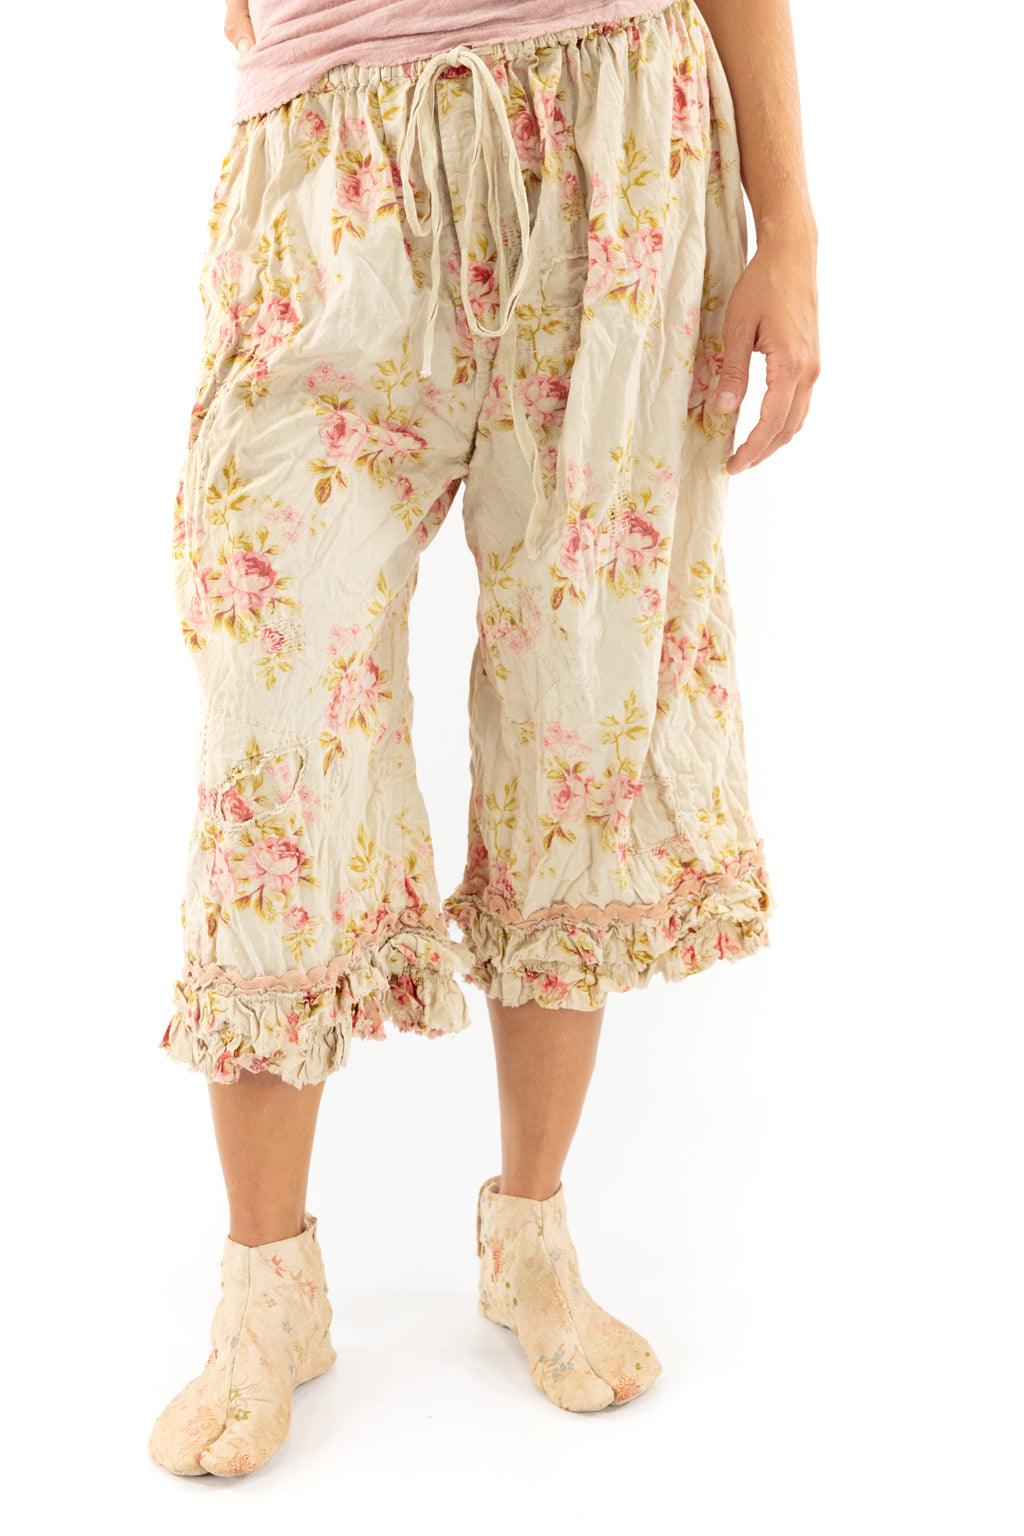 Floral Khloe Bloomers - Magnolia Pearl Clothing